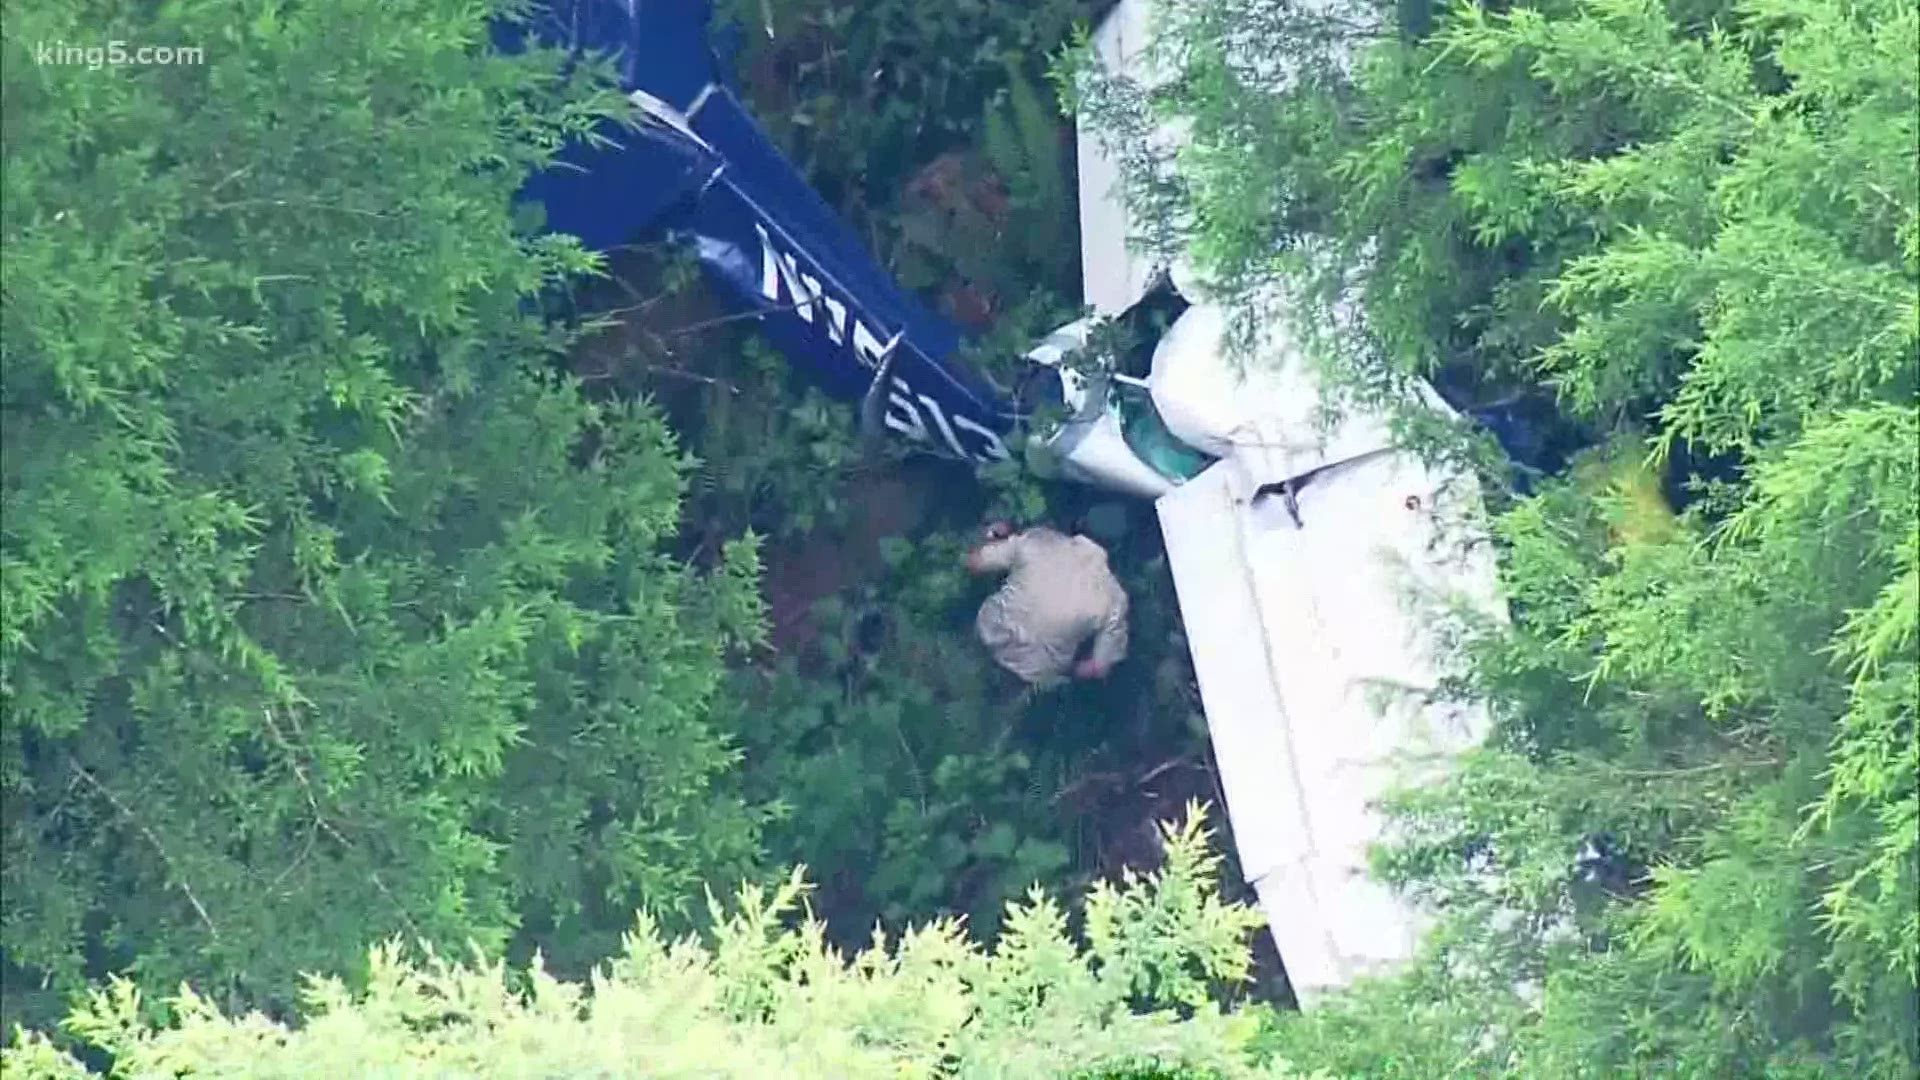 The individual who allegedly stole the plane is still at Harborview Medical Center in critical condition.